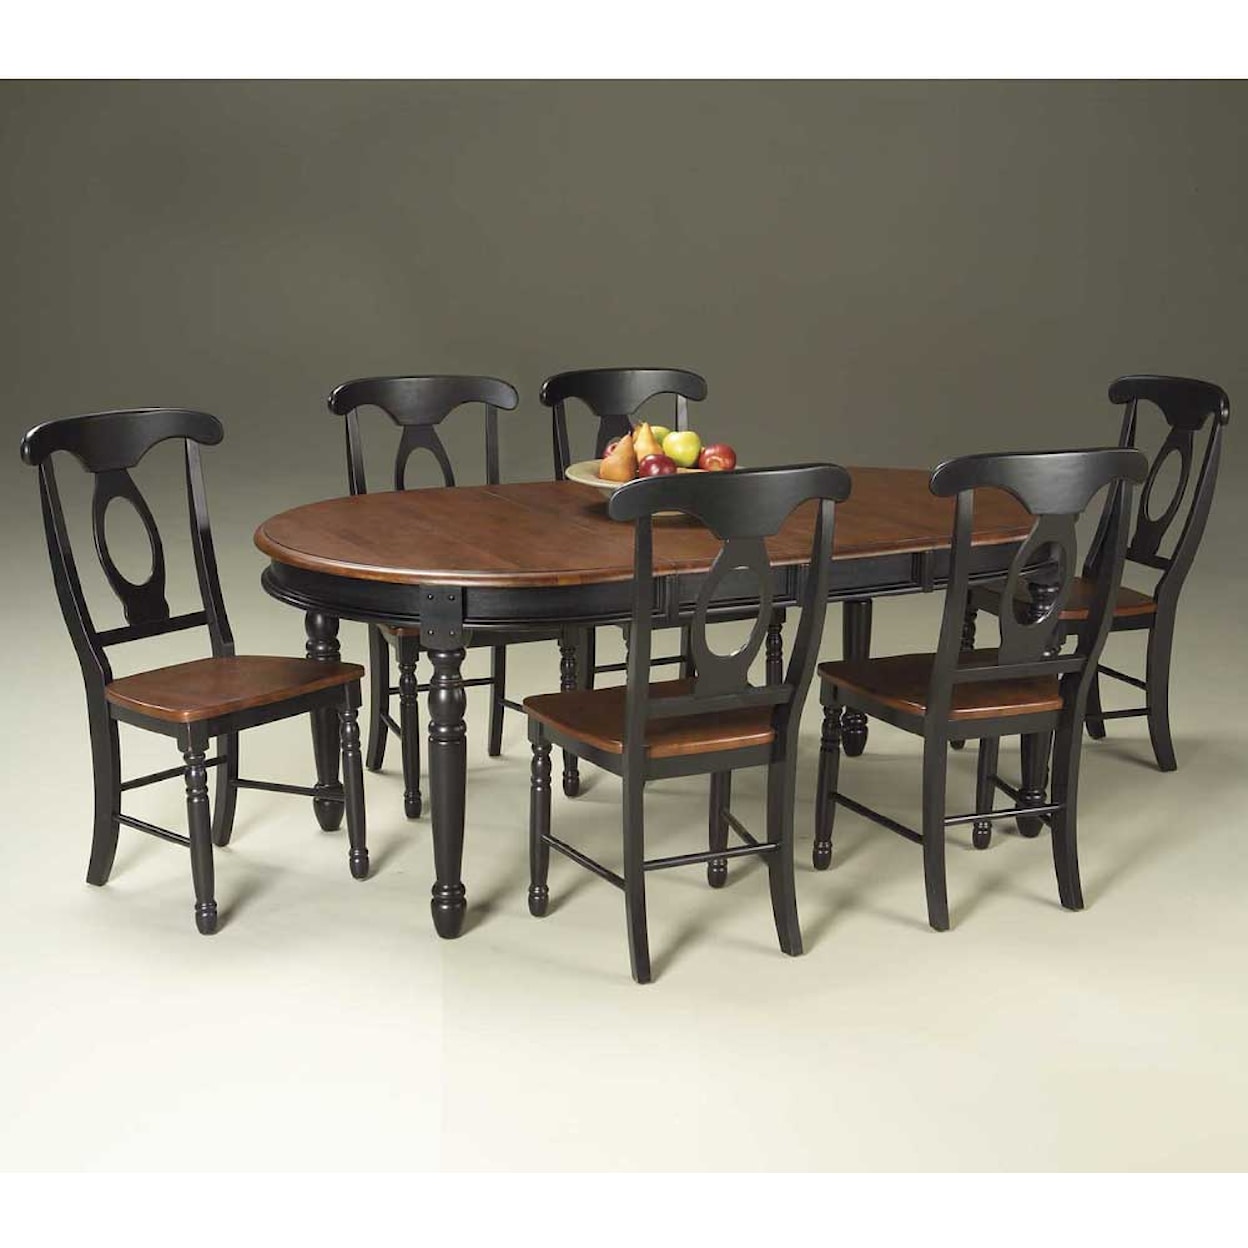 AAmerica British Isles Oval Leg Table with Chairs